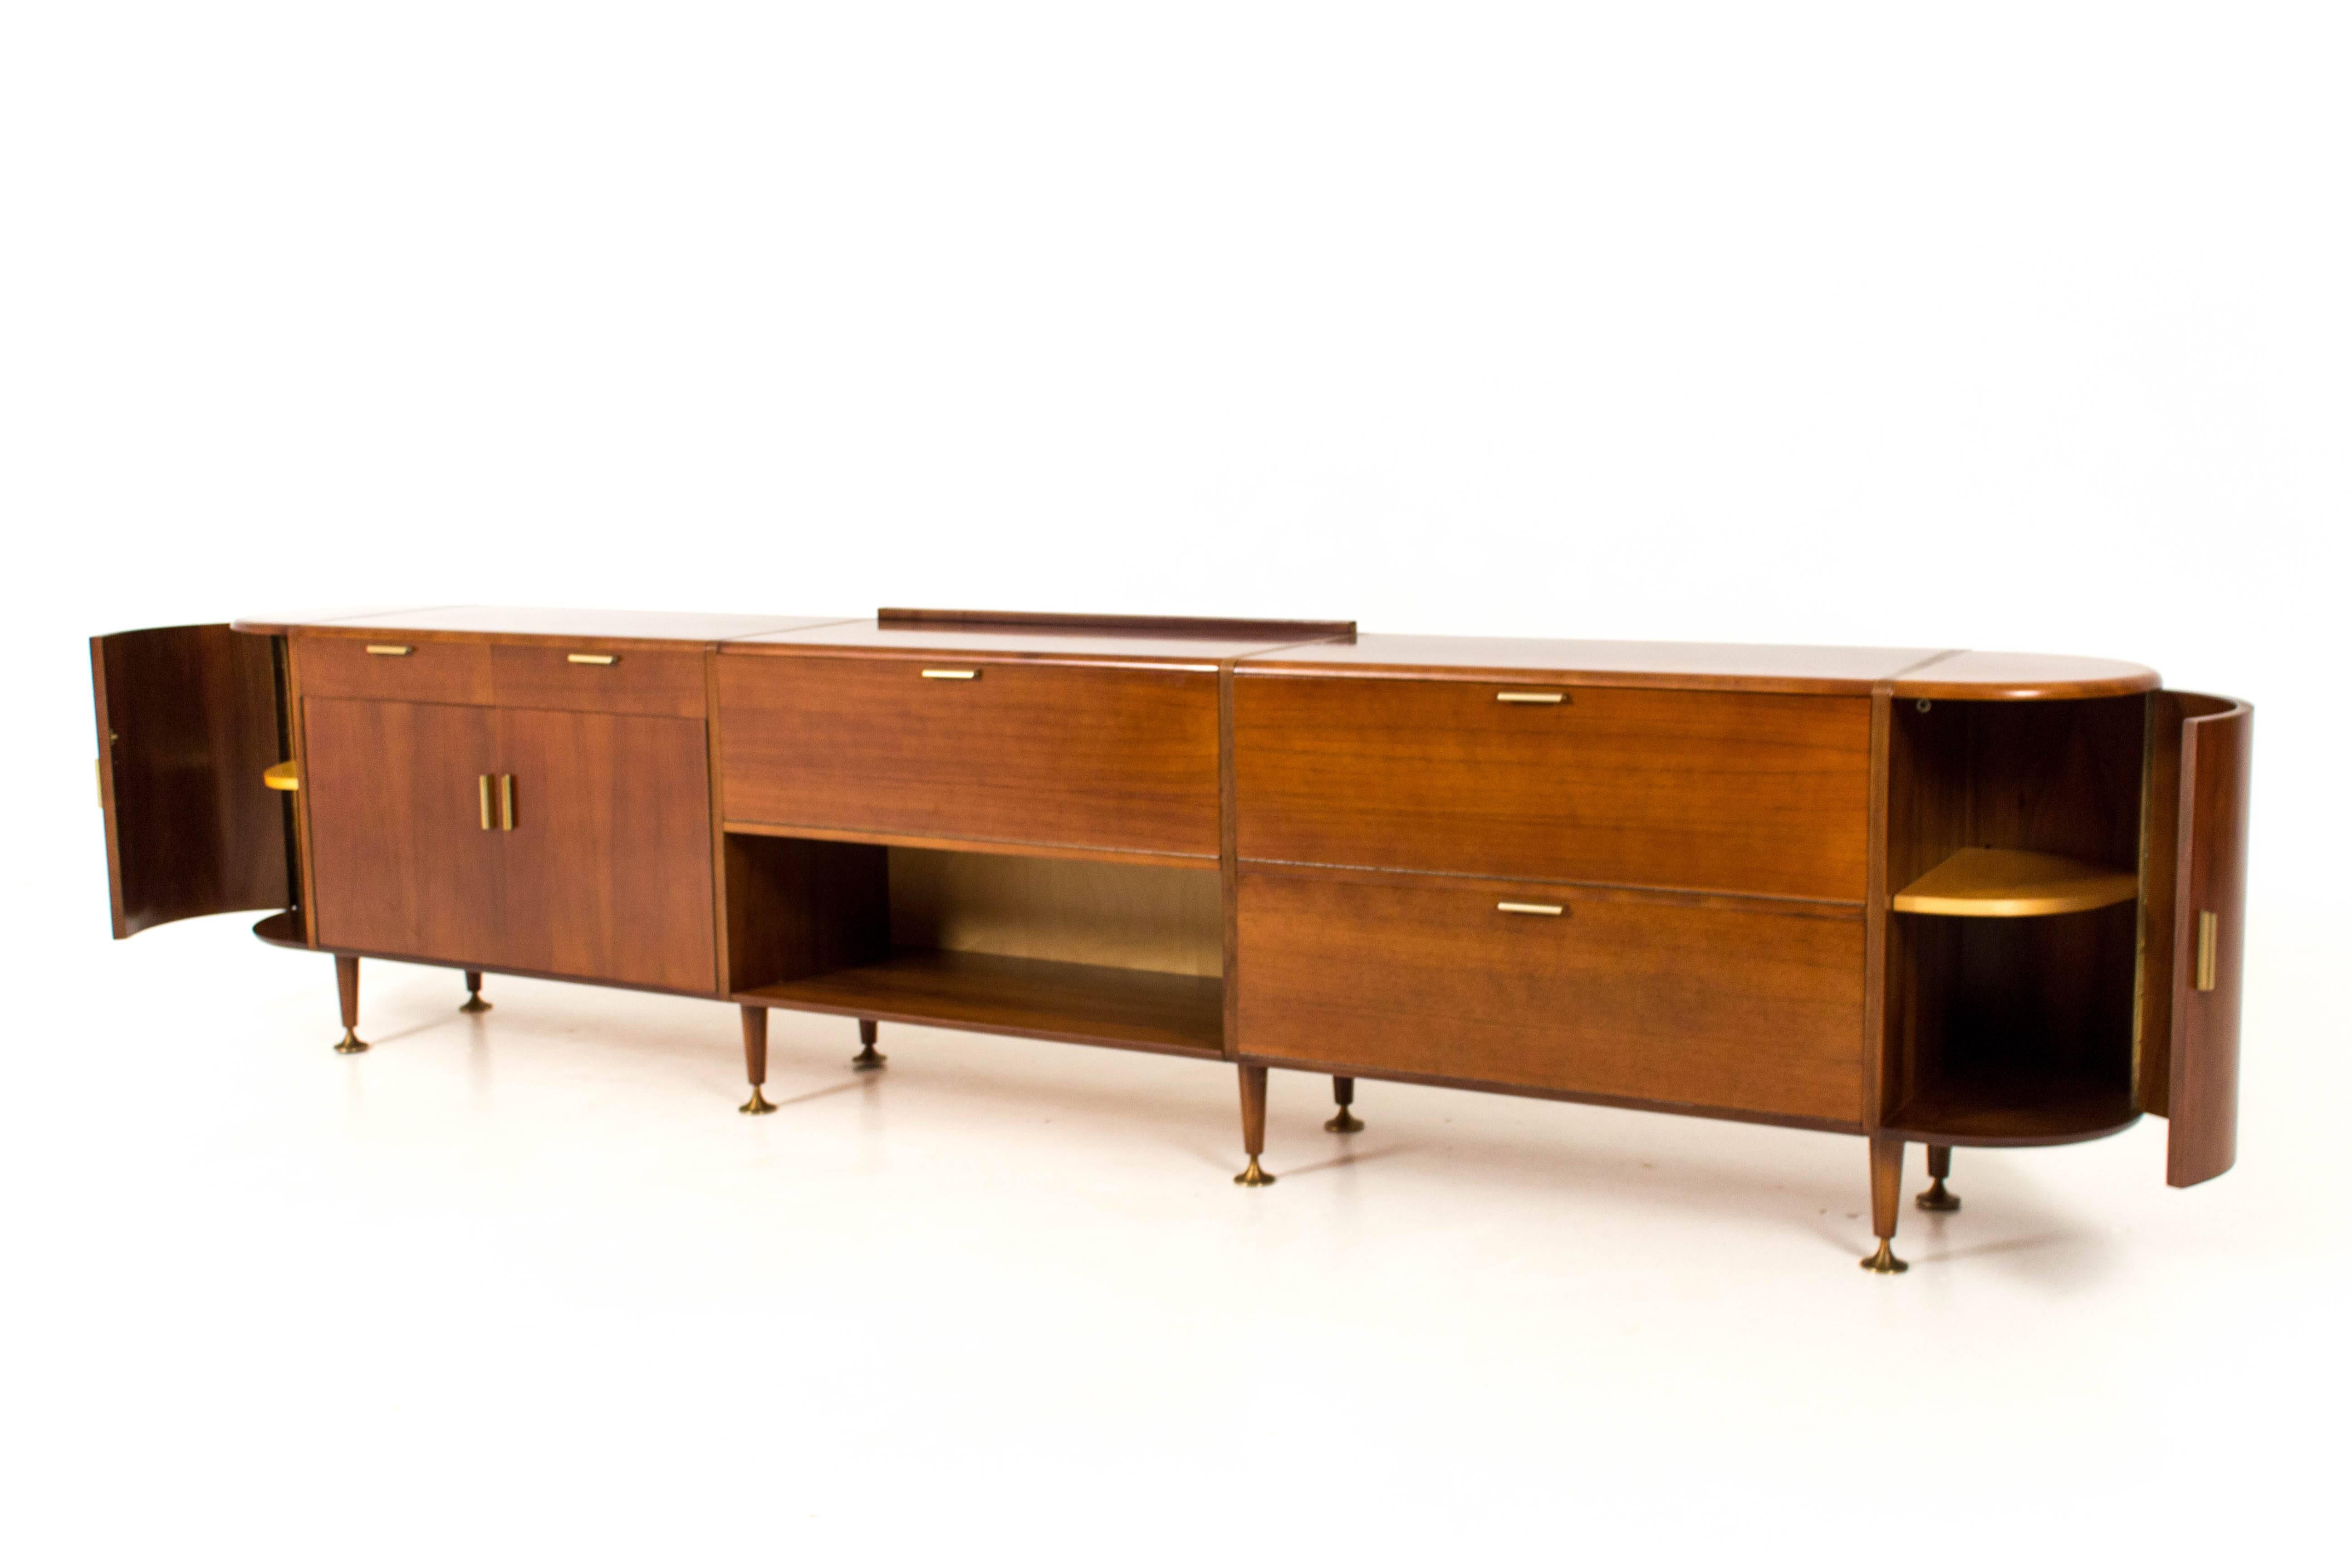 Dutch Extra Large Mid-Century Modern Sideboard by A.A.Patijn for Poly-Z, 1960s